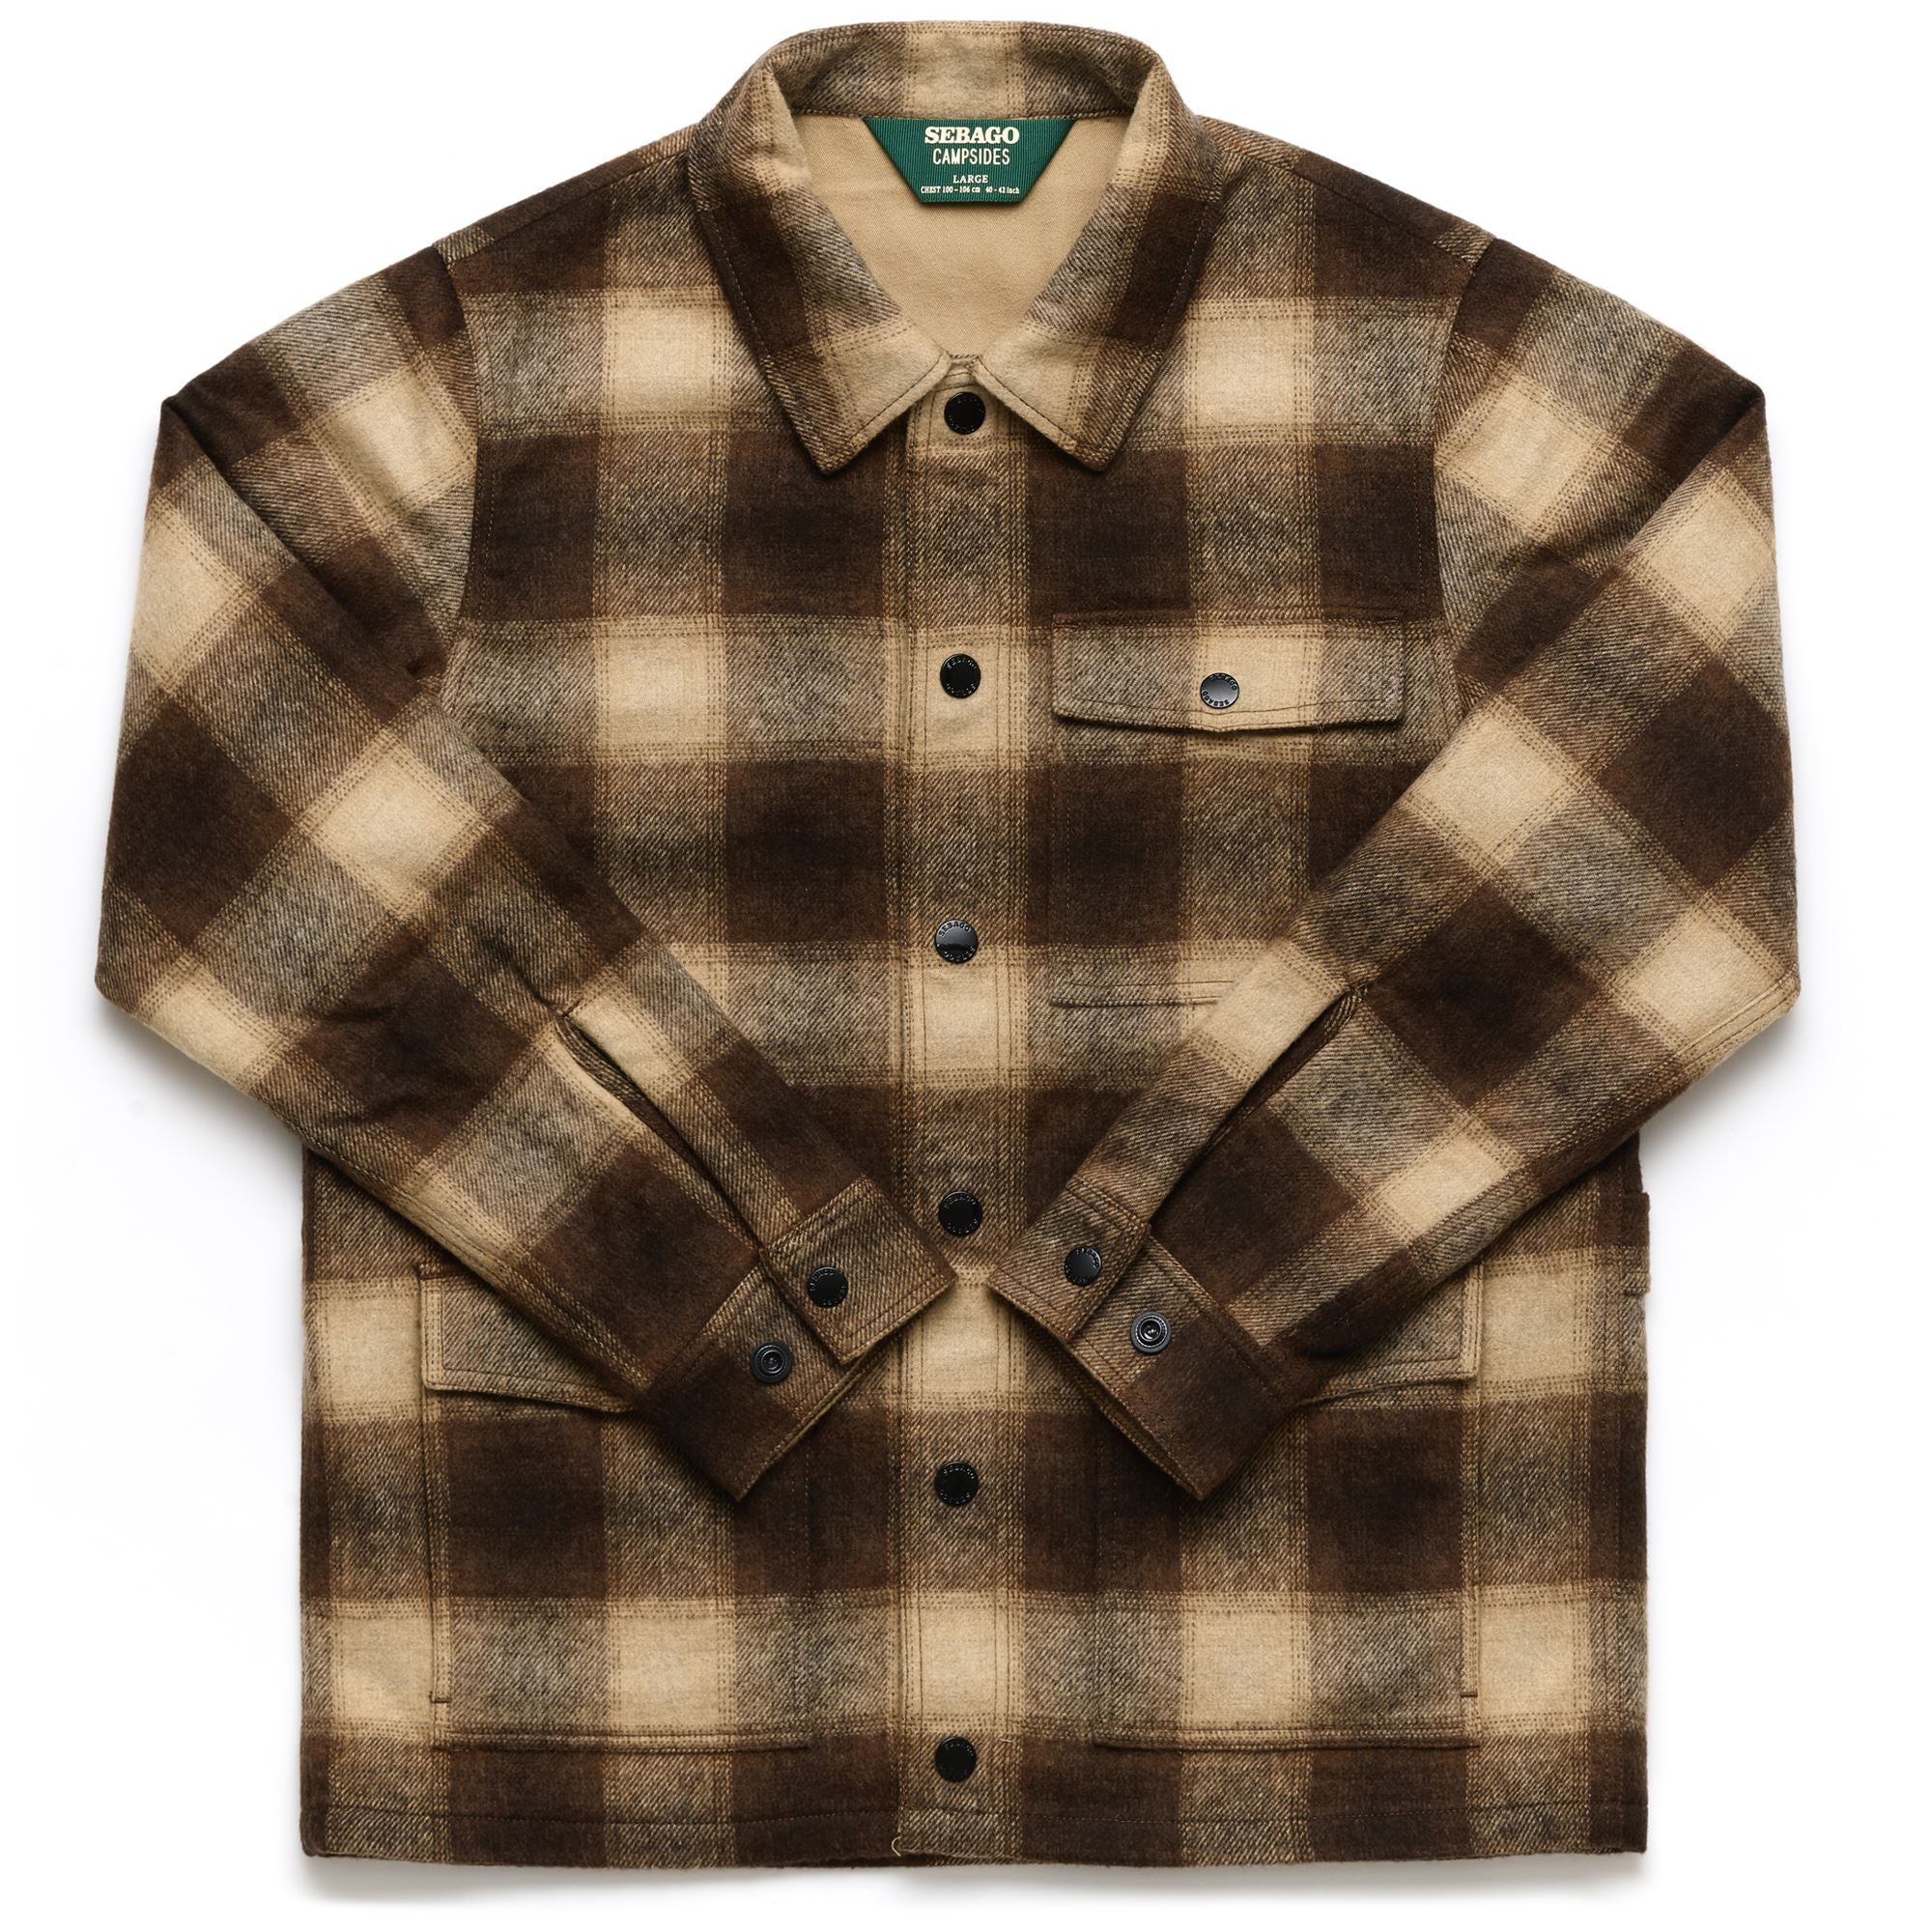 KENNY CHECK - Jackets - Mid - Man - BEIGE-BROWN